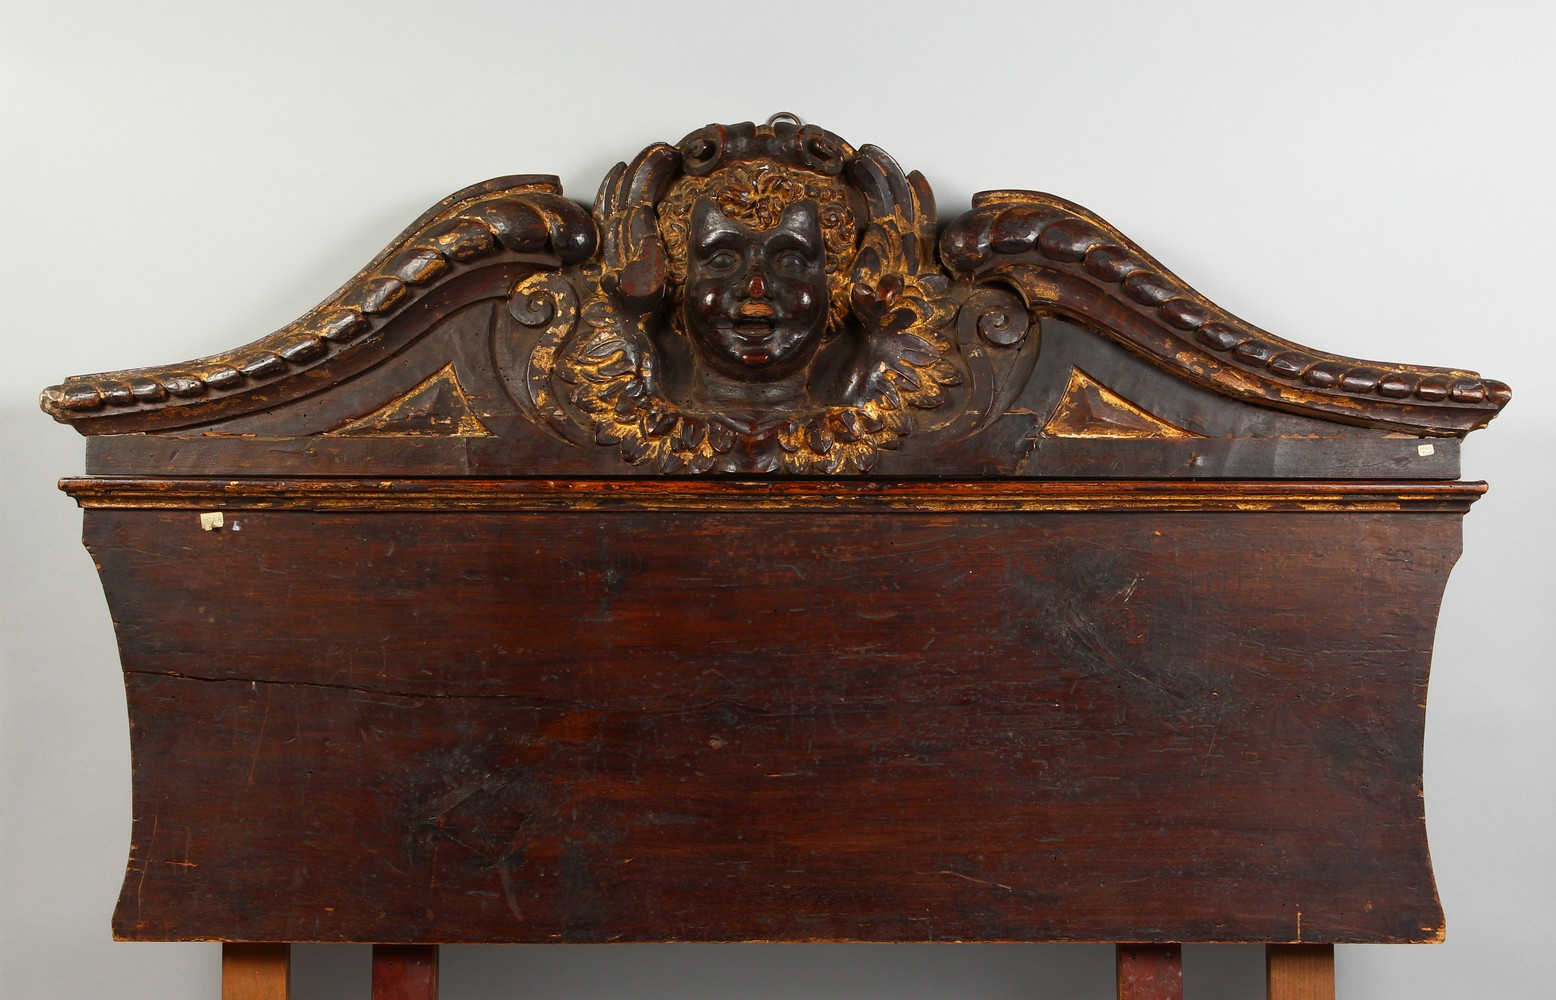 A 17TH-18TH CENTURY ITALIAN CARVED WOOD AND GILDED HEADBOARD carved with a mask. 45ins long x